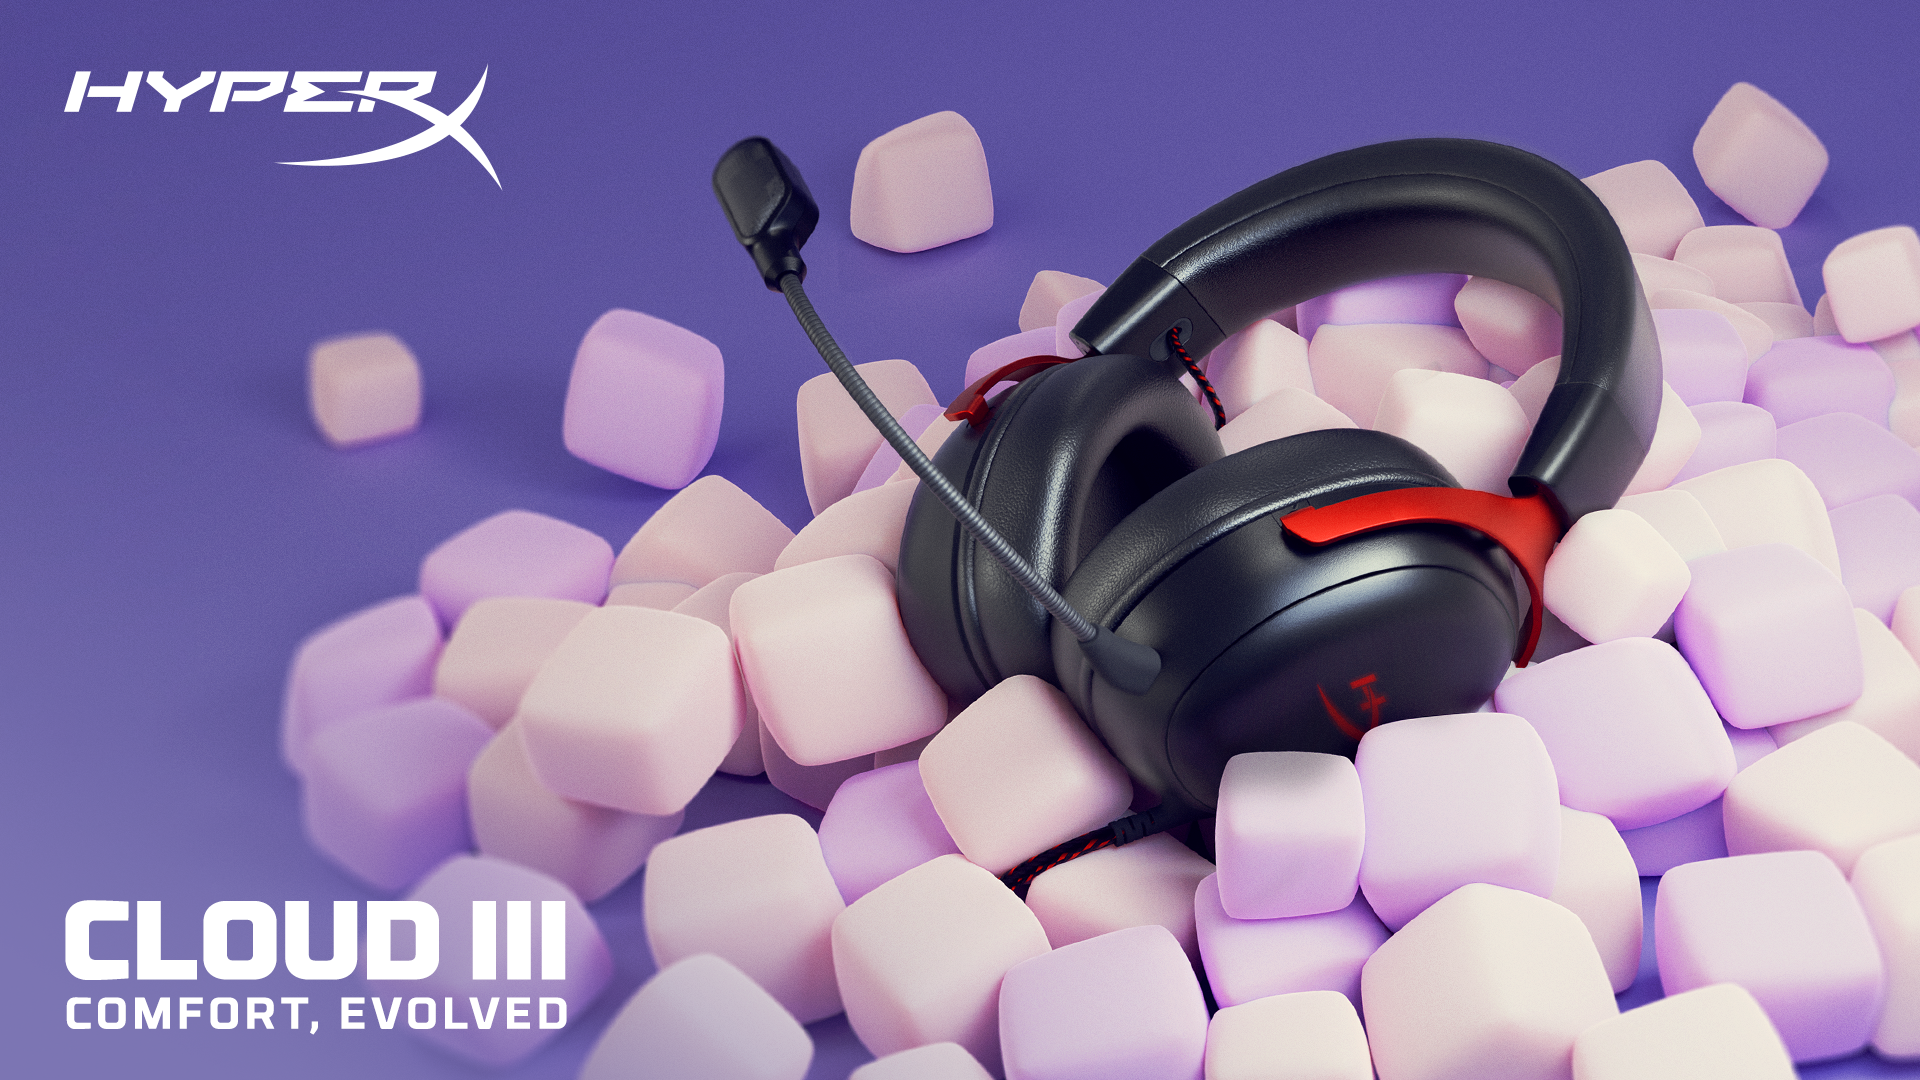 iTWire - HyperX releases Cloud III wireless gaming headset with